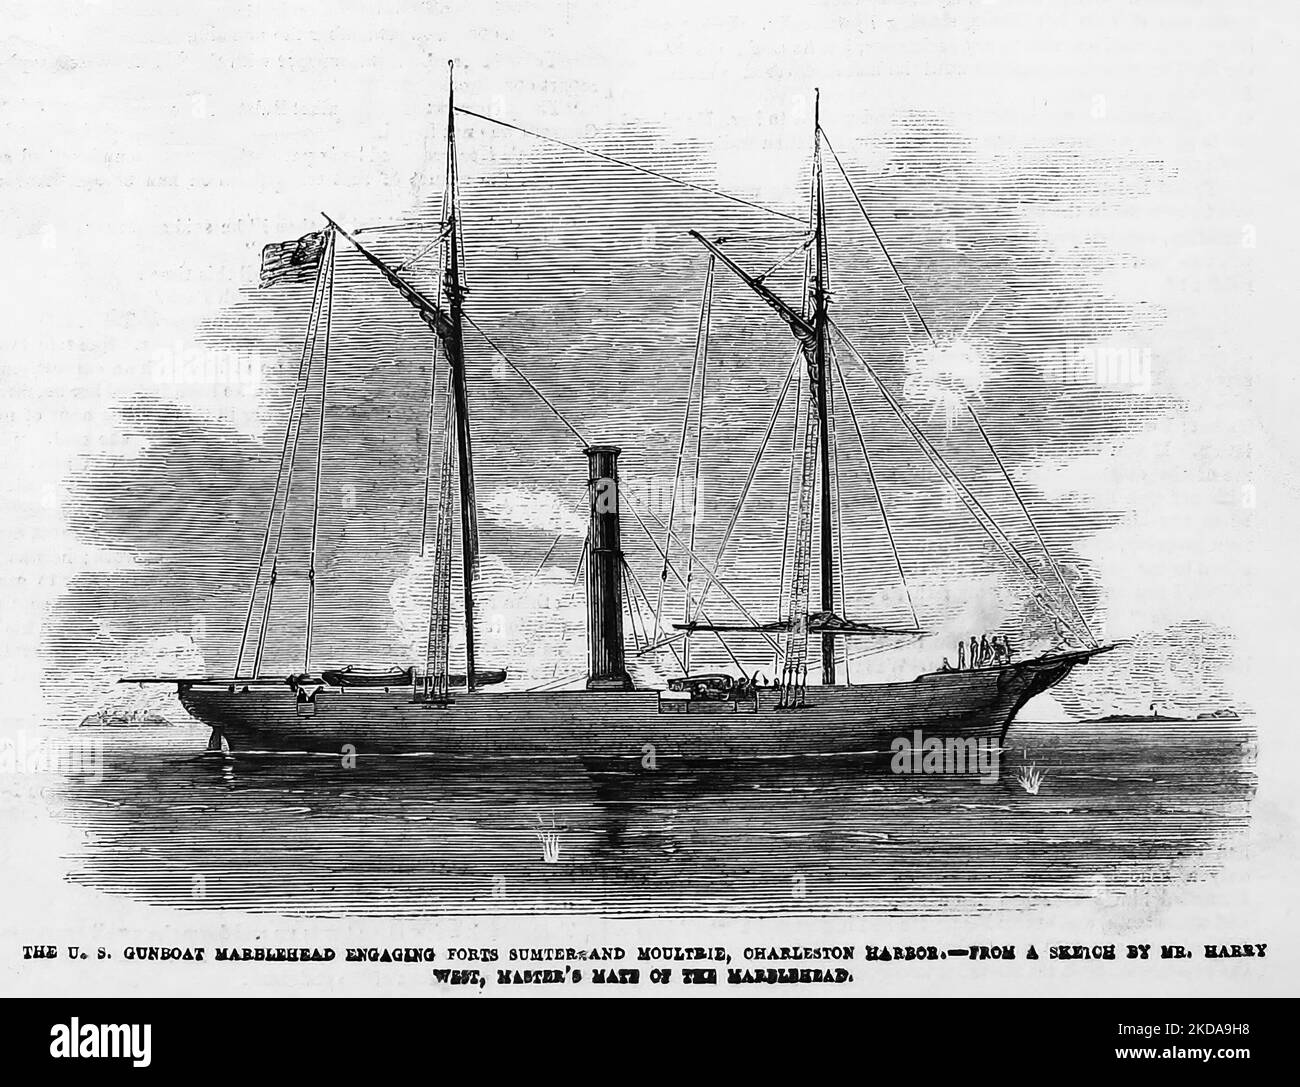 The U. S. gunboat Marblehead engaging Forts Sumter and Moultrie, Charleston Harbor. November 1862. 19th century American Civil War illustration from Frank Leslie's Illustrated Newspaper Stock Photo